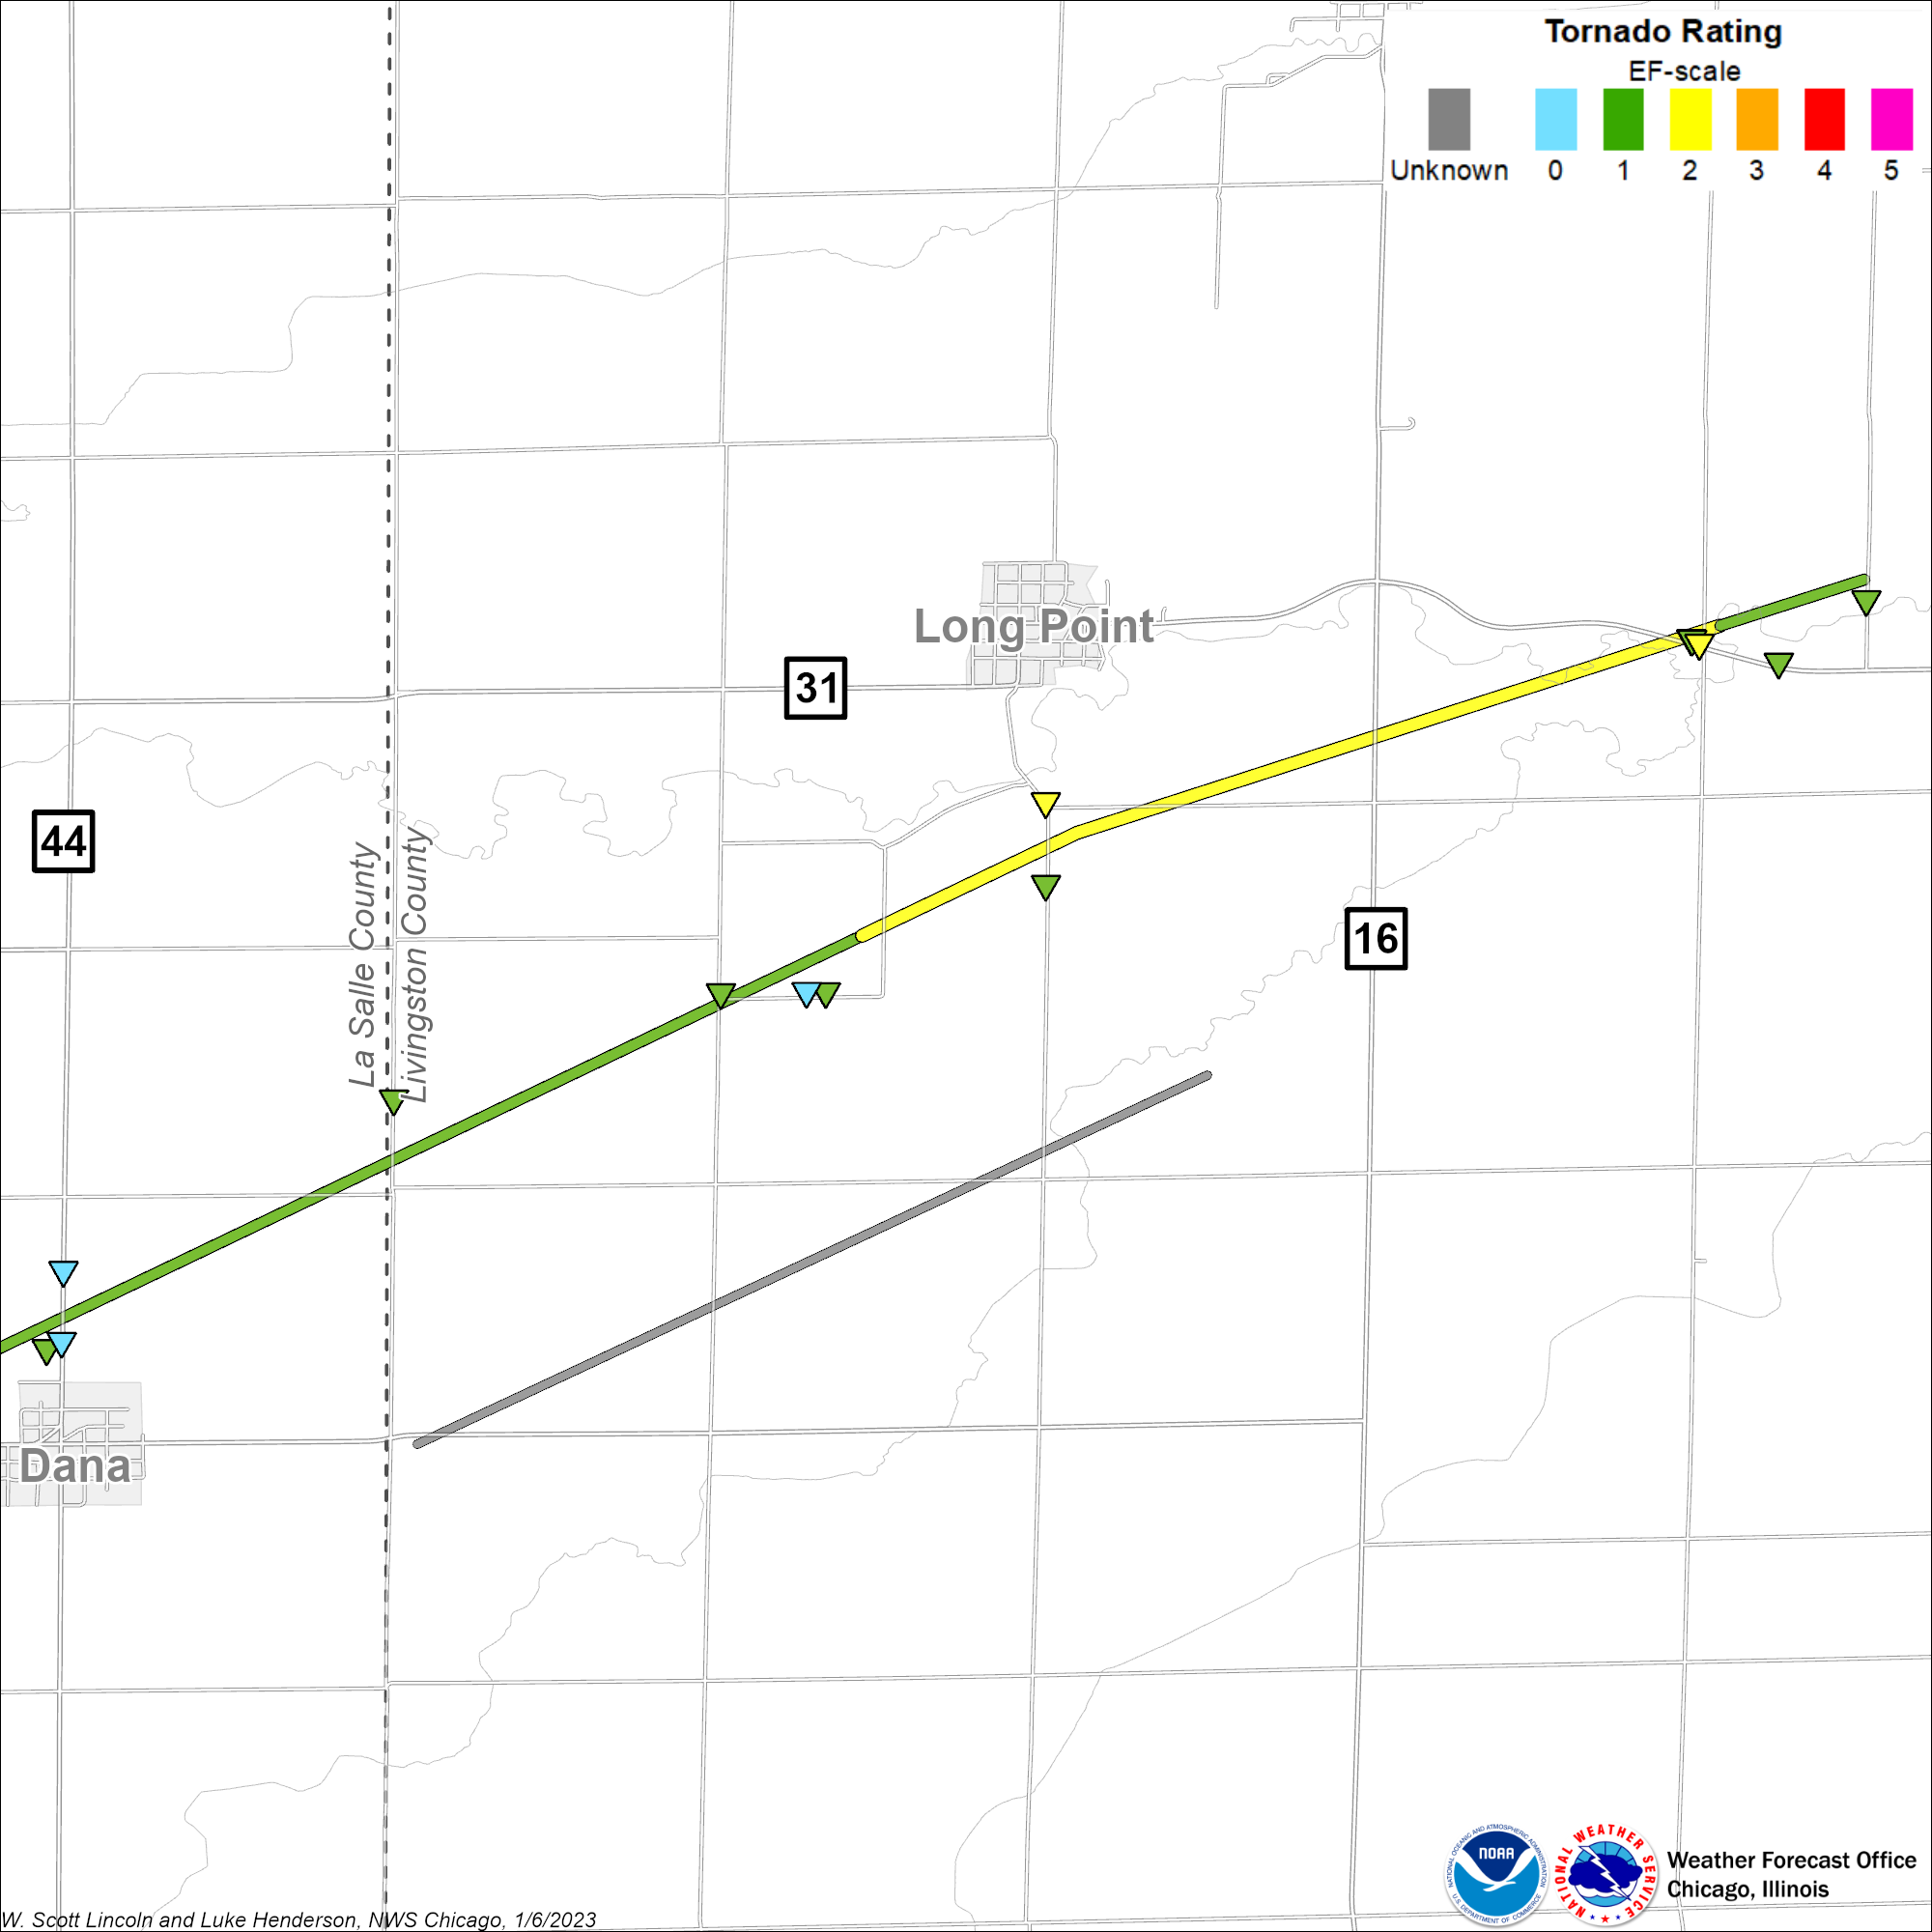 Map showing Washington - Long Point tornado track, zoomed in to Long Point area